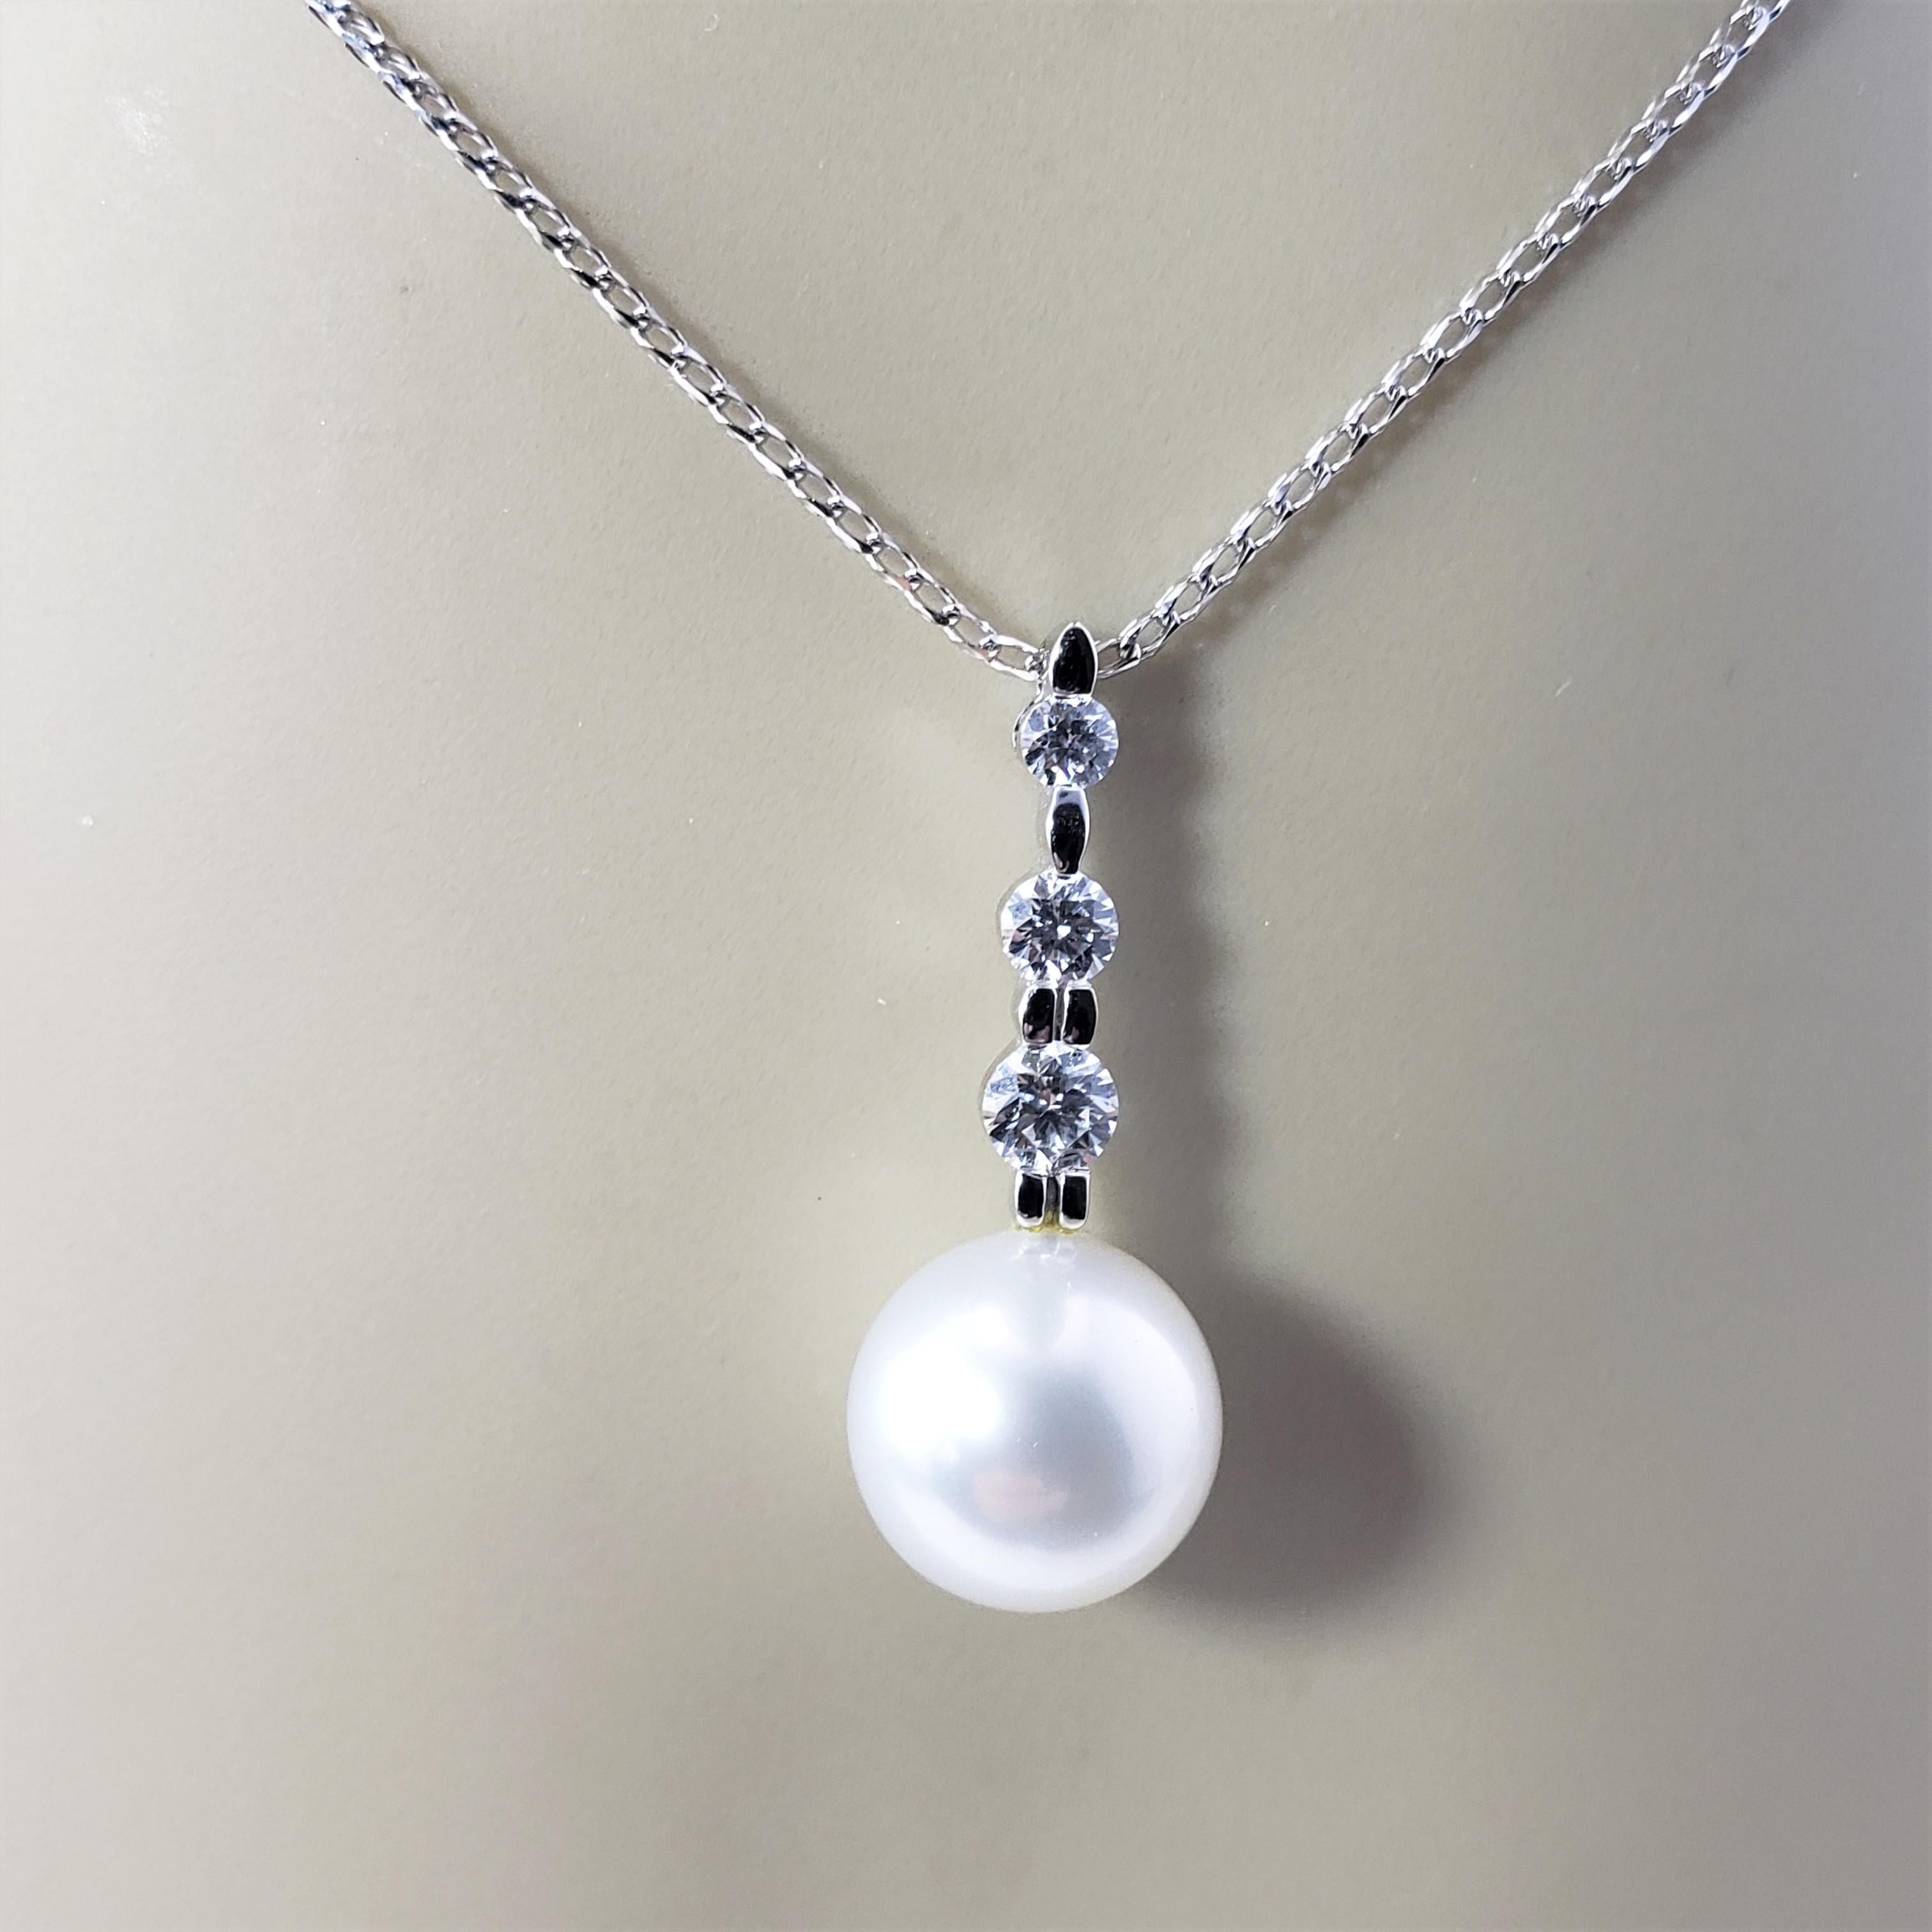 18 Karat White Gold Pearl and Diamond Pendant Necklace For Sale 2